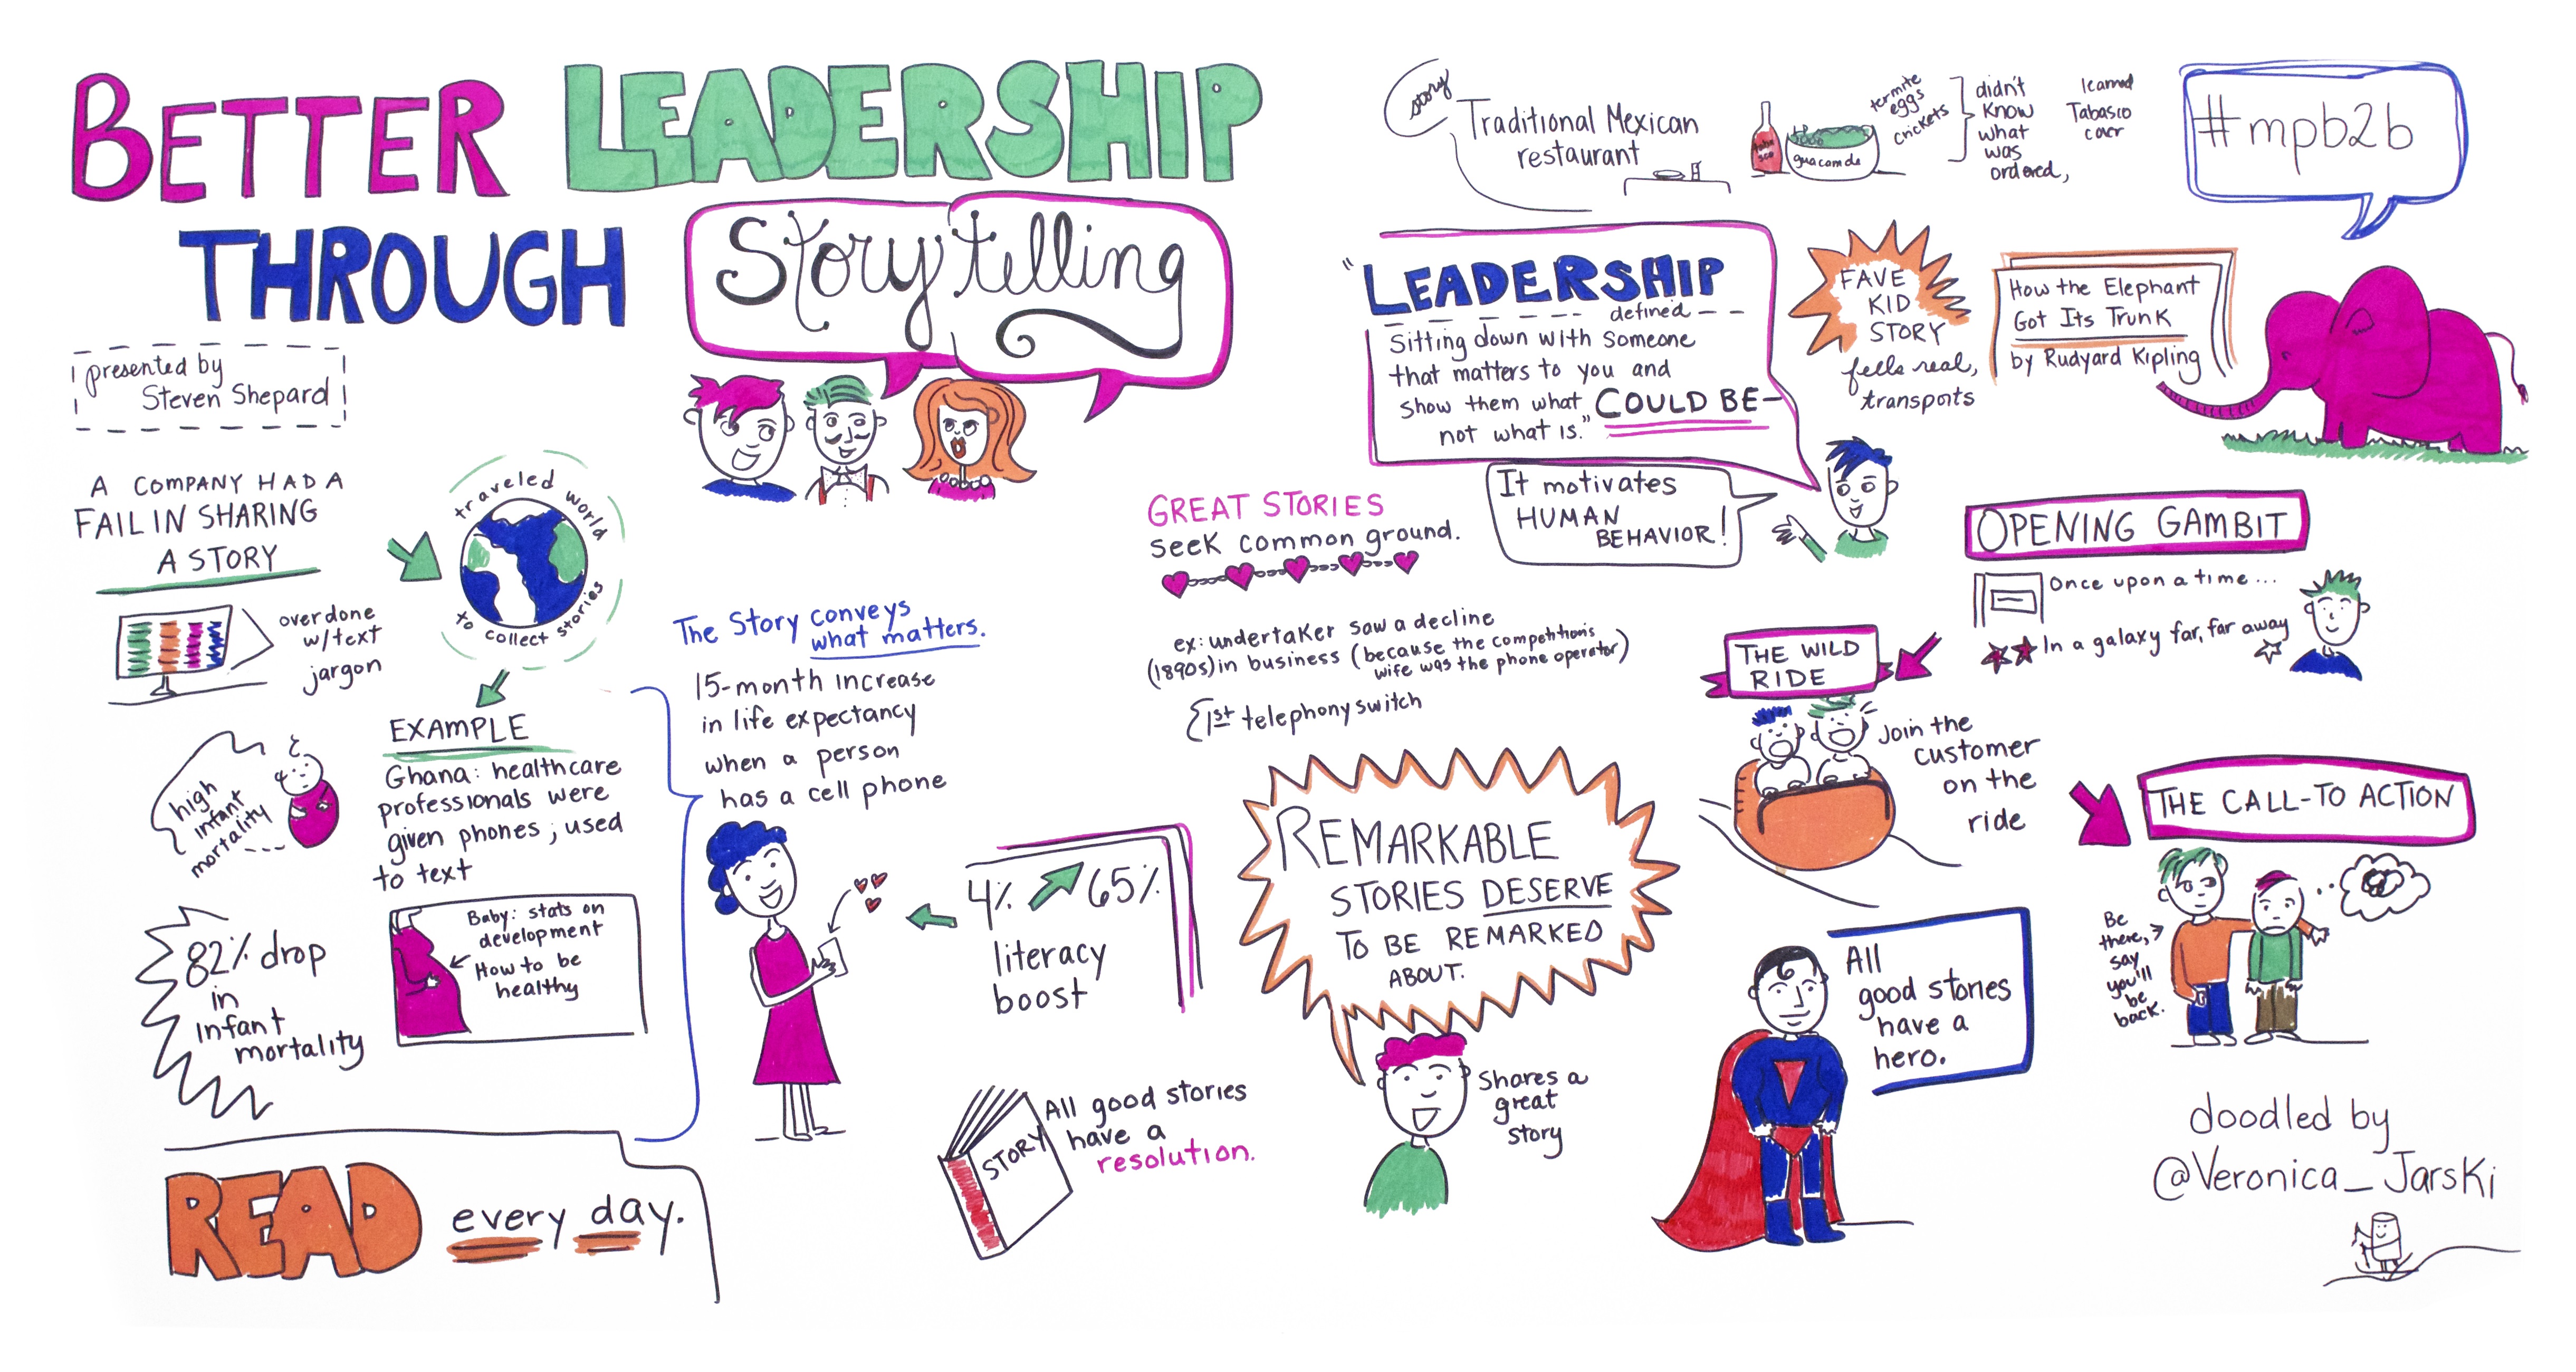 The role of storytelling in leadership